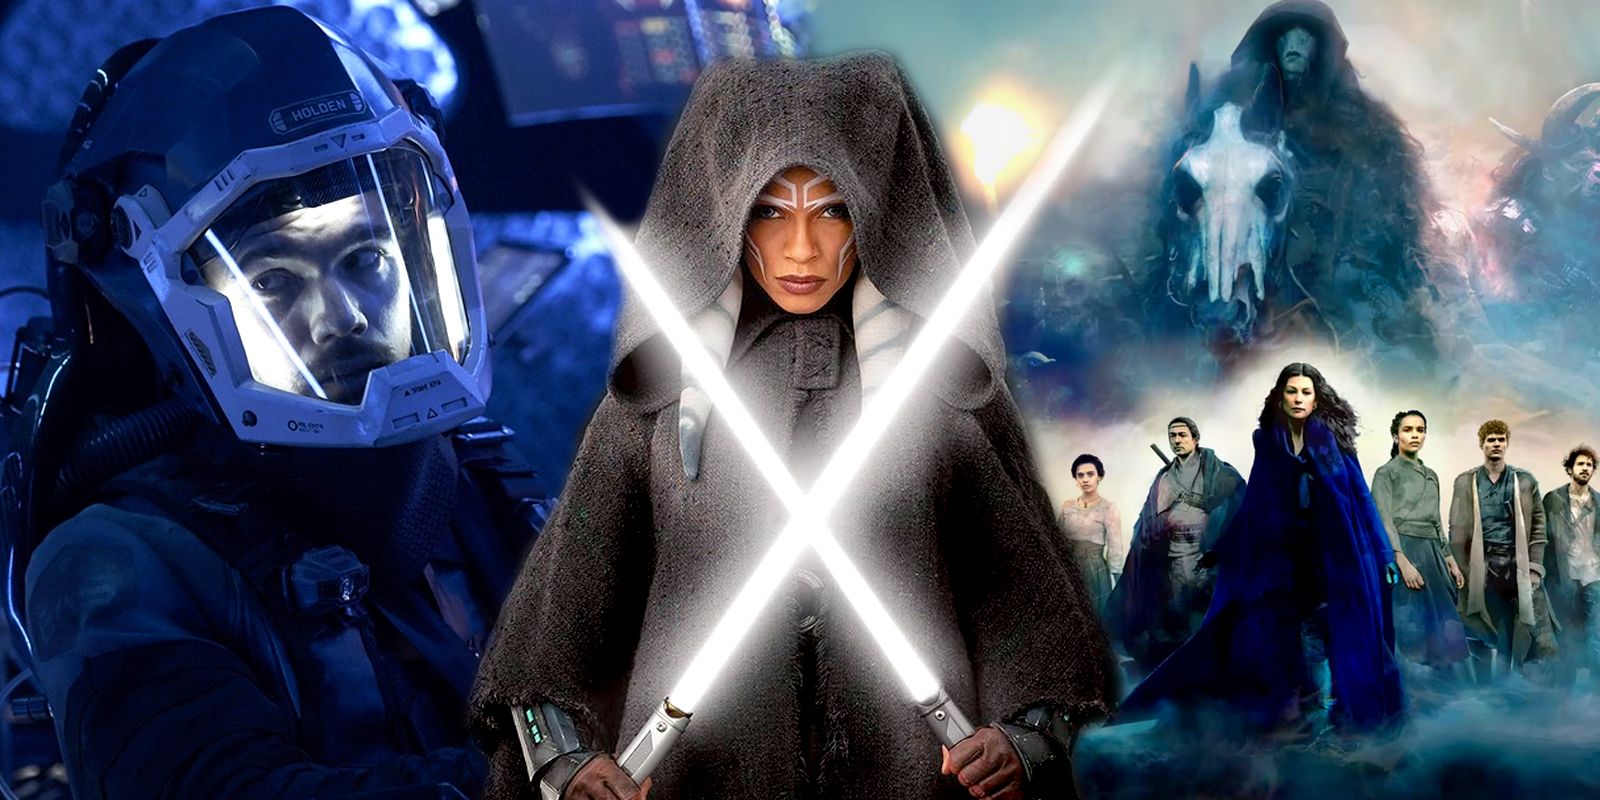 The Expanse Ahsoka and Wheel of Time Collage with Jim Holden Rosario Dawson and Rosamund Pike